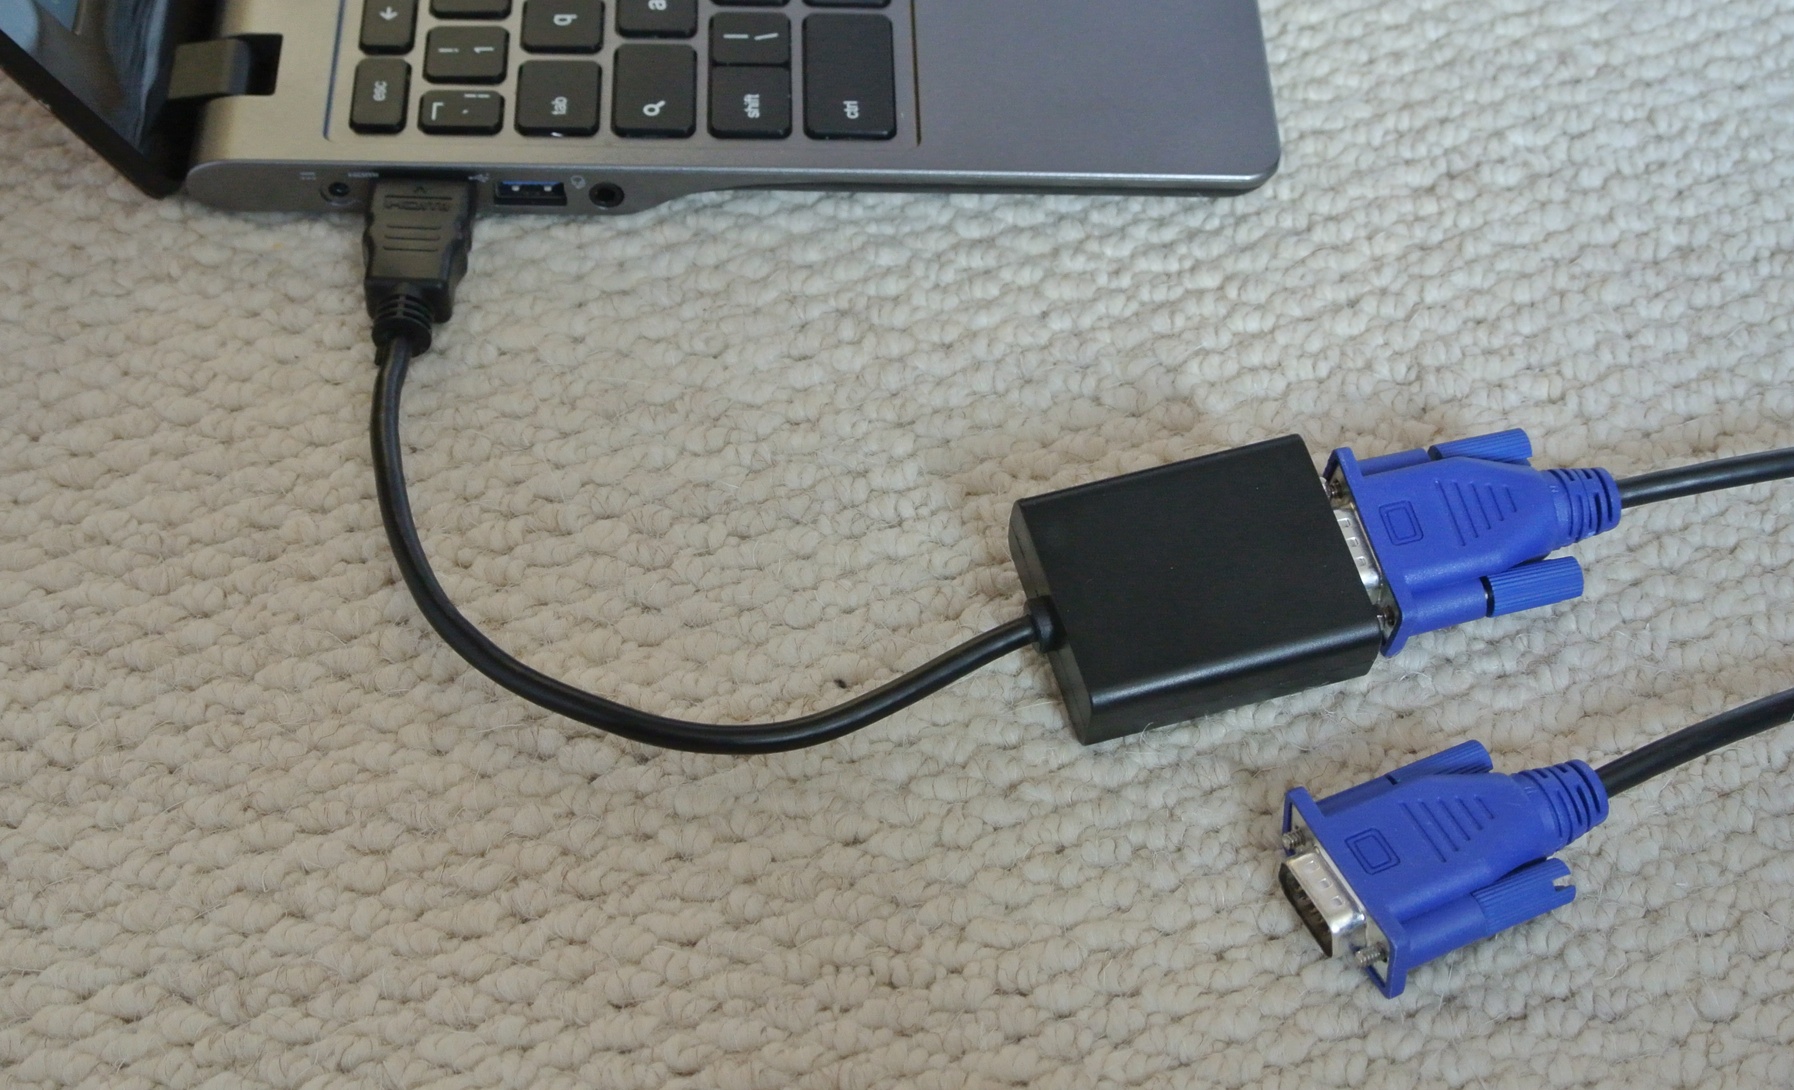 wireless hdmi connection from laptop to projector